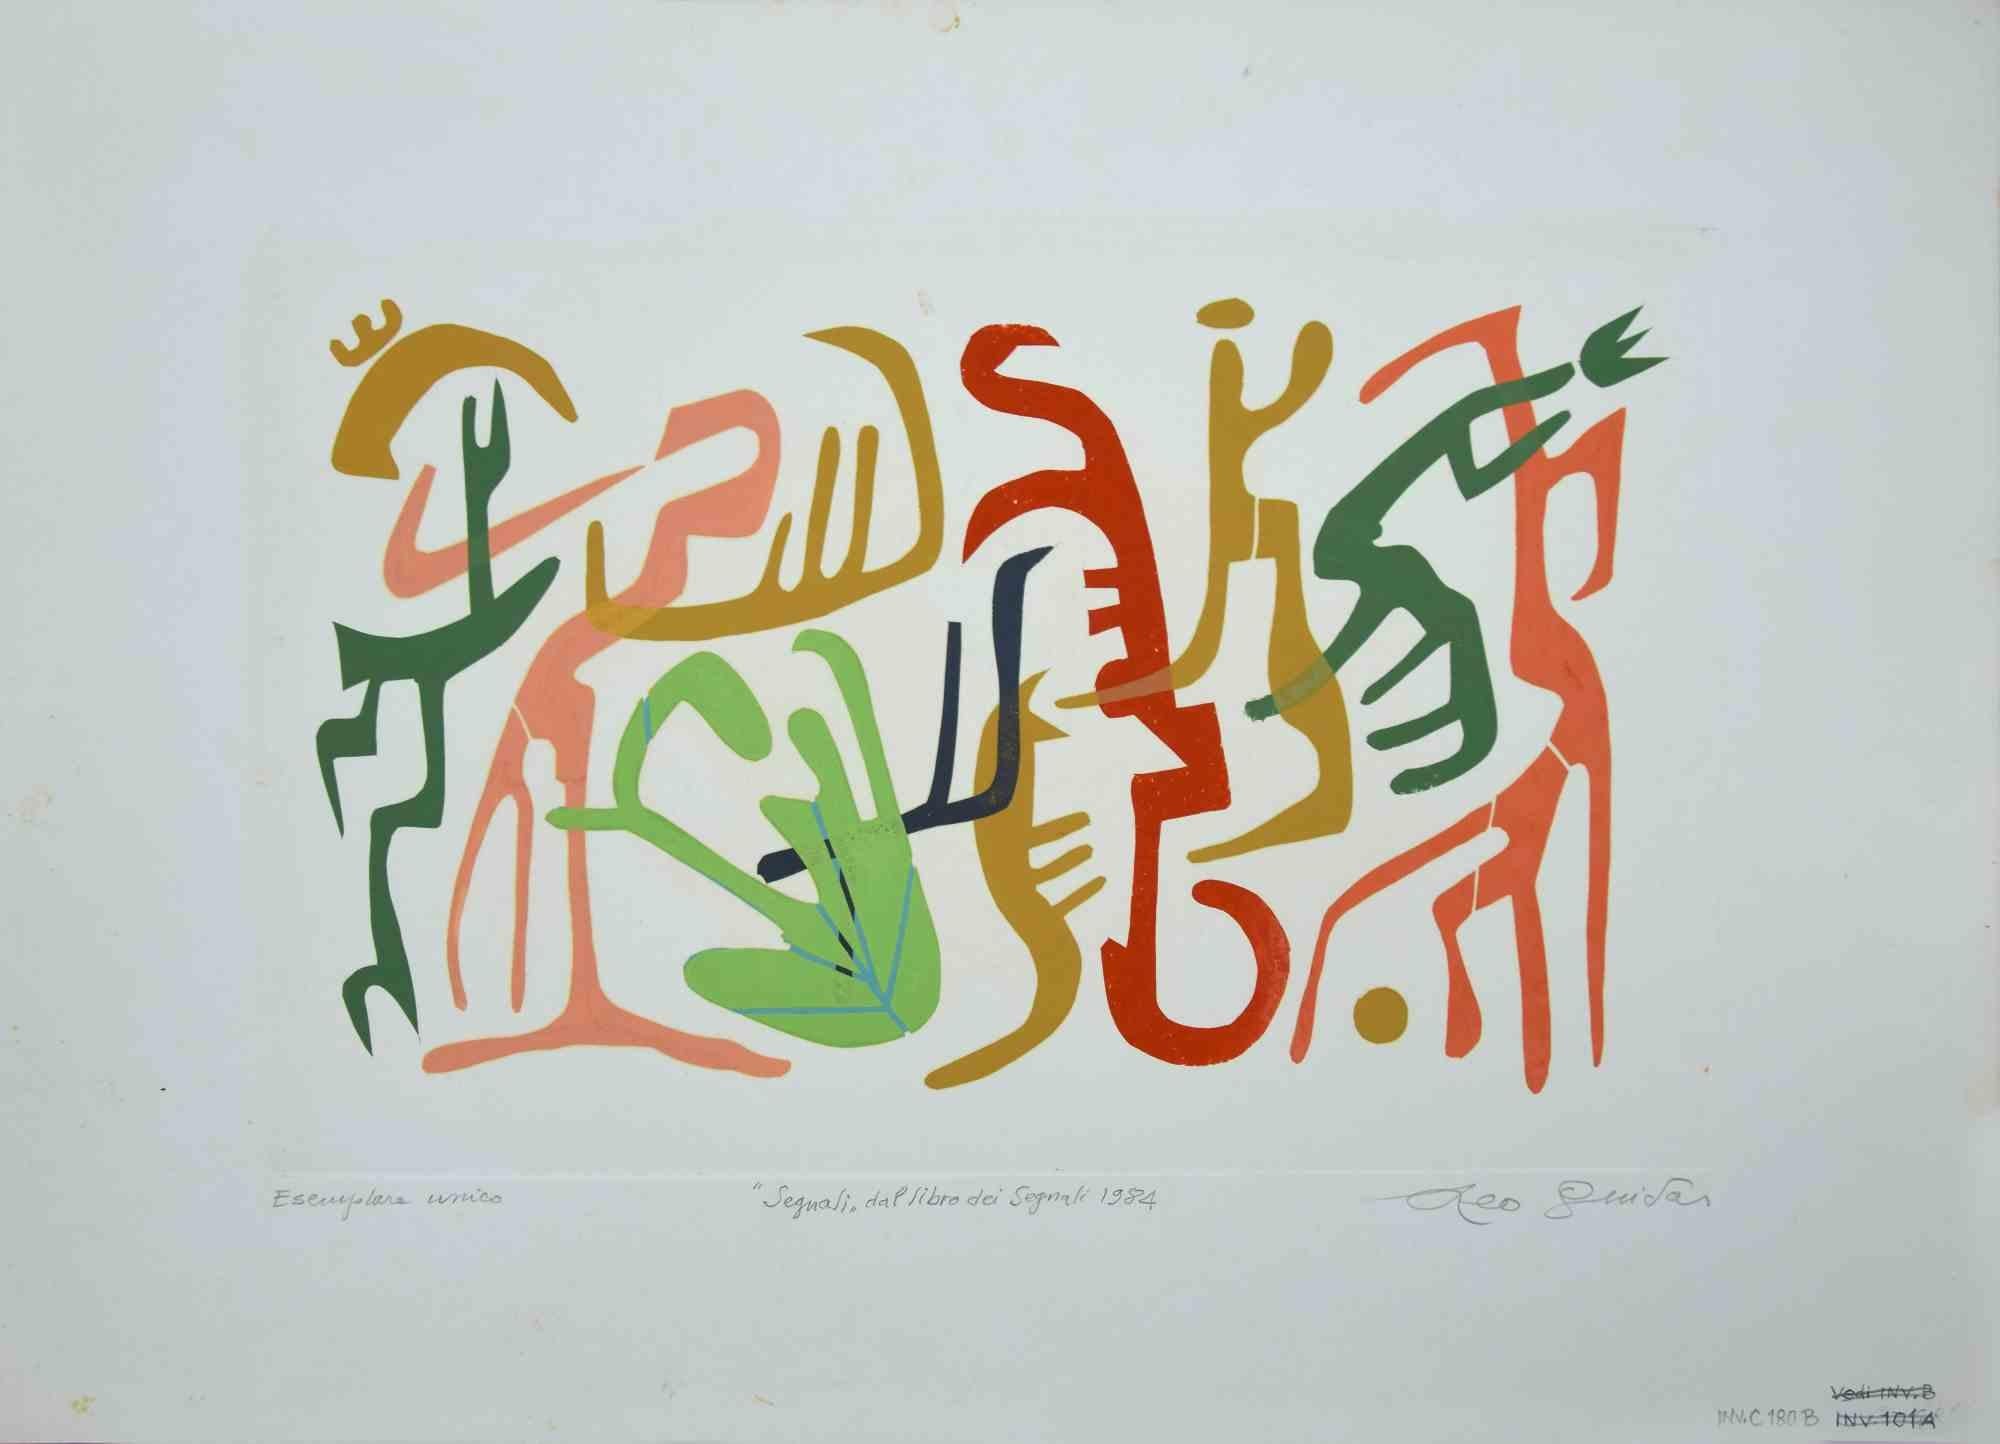 Signals is an original Contemporary artwork realized  in 1984  by the italian Contemporary artist  Leo Guida  (1992 - 2017).

Original colored etching on ivory-colored cardboard.
 
Hand-signed and dated on the lower margin. Cat. INV.C 180B

Titled